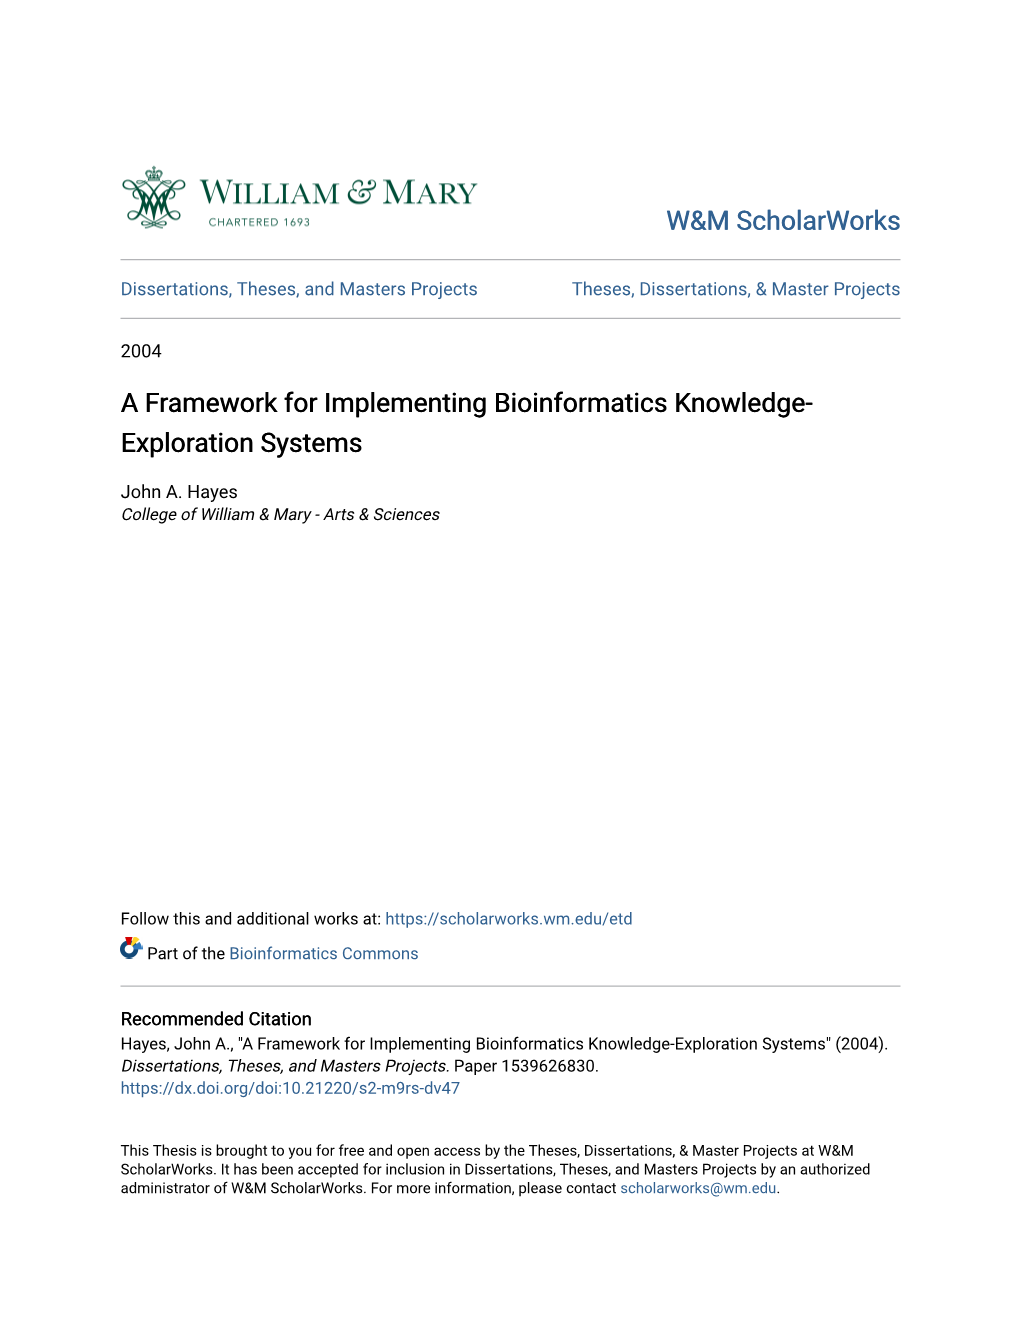 A Framework for Implementing Bioinformatics Knowledge-Exploration Systems" (2004)